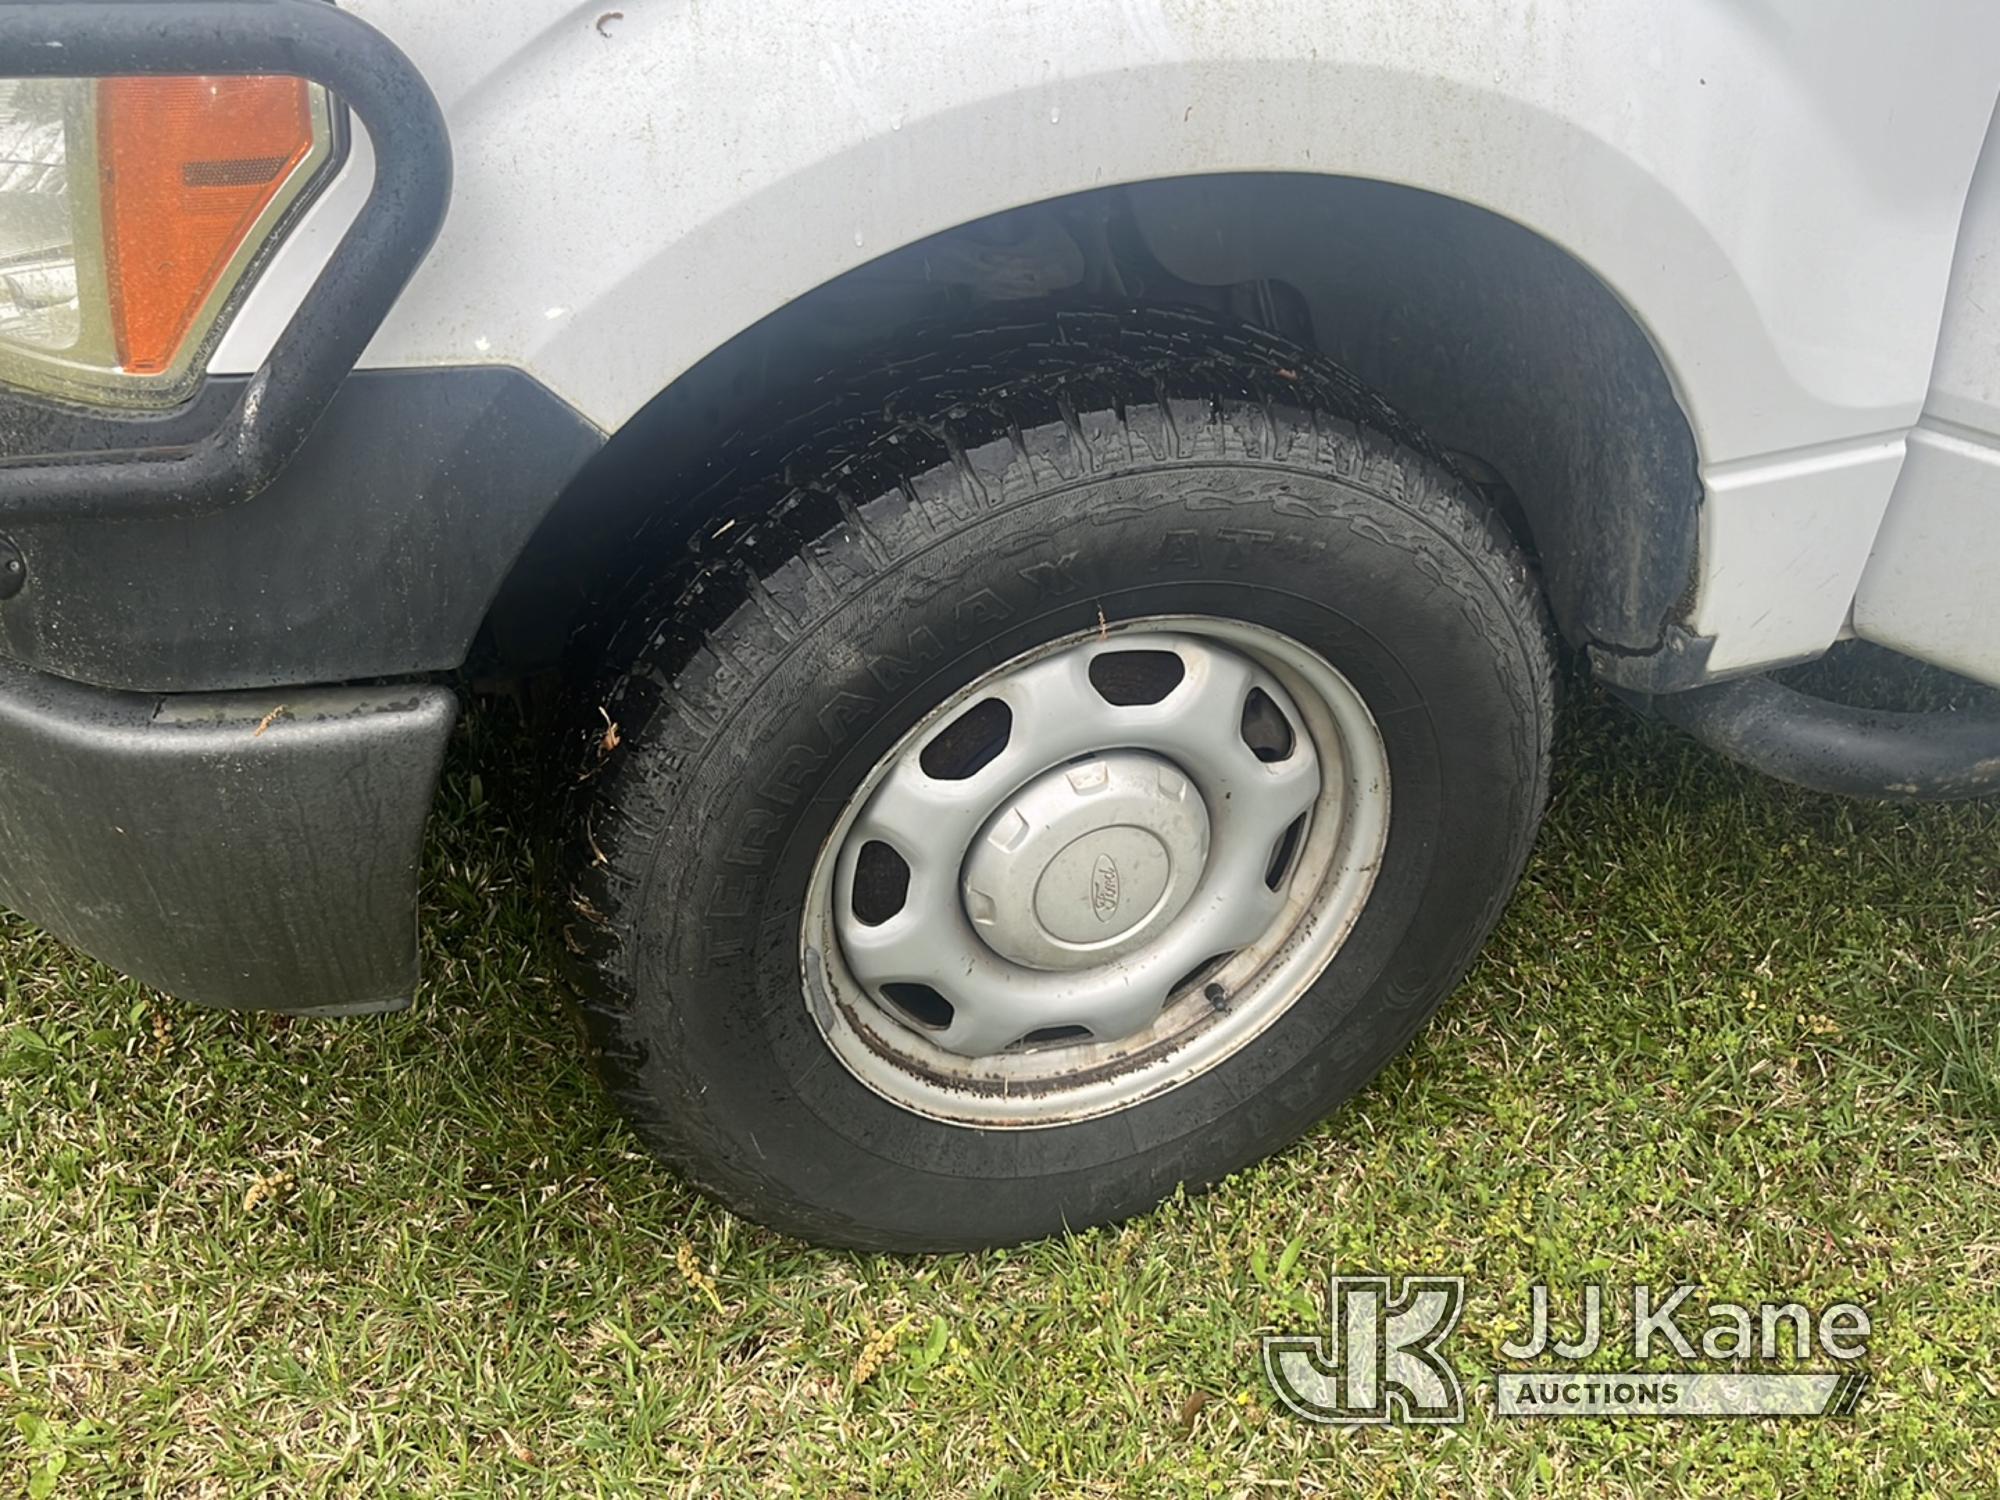 (Bennettsville, SC) 2014 Ford F150 4x4 Extended-Cab Pickup Truck Runs Rough & Moves) (Shuts Off, Bod